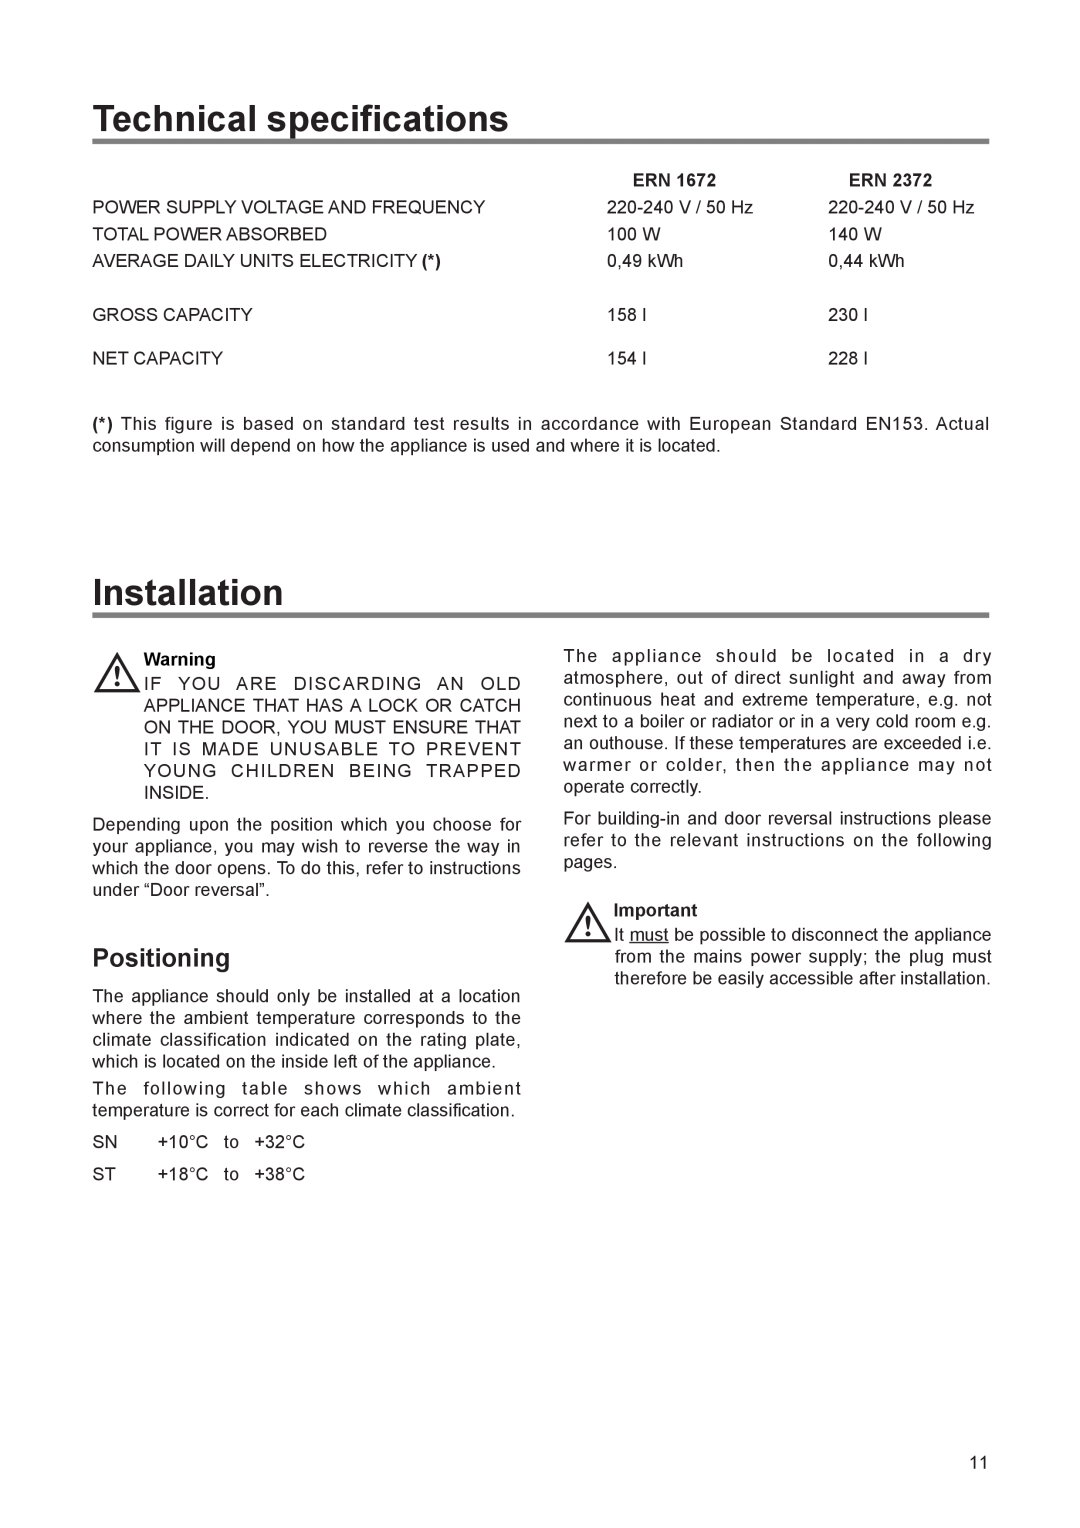 Electrolux ERN 1673 manual Technical specifications, Installation, Positioning 